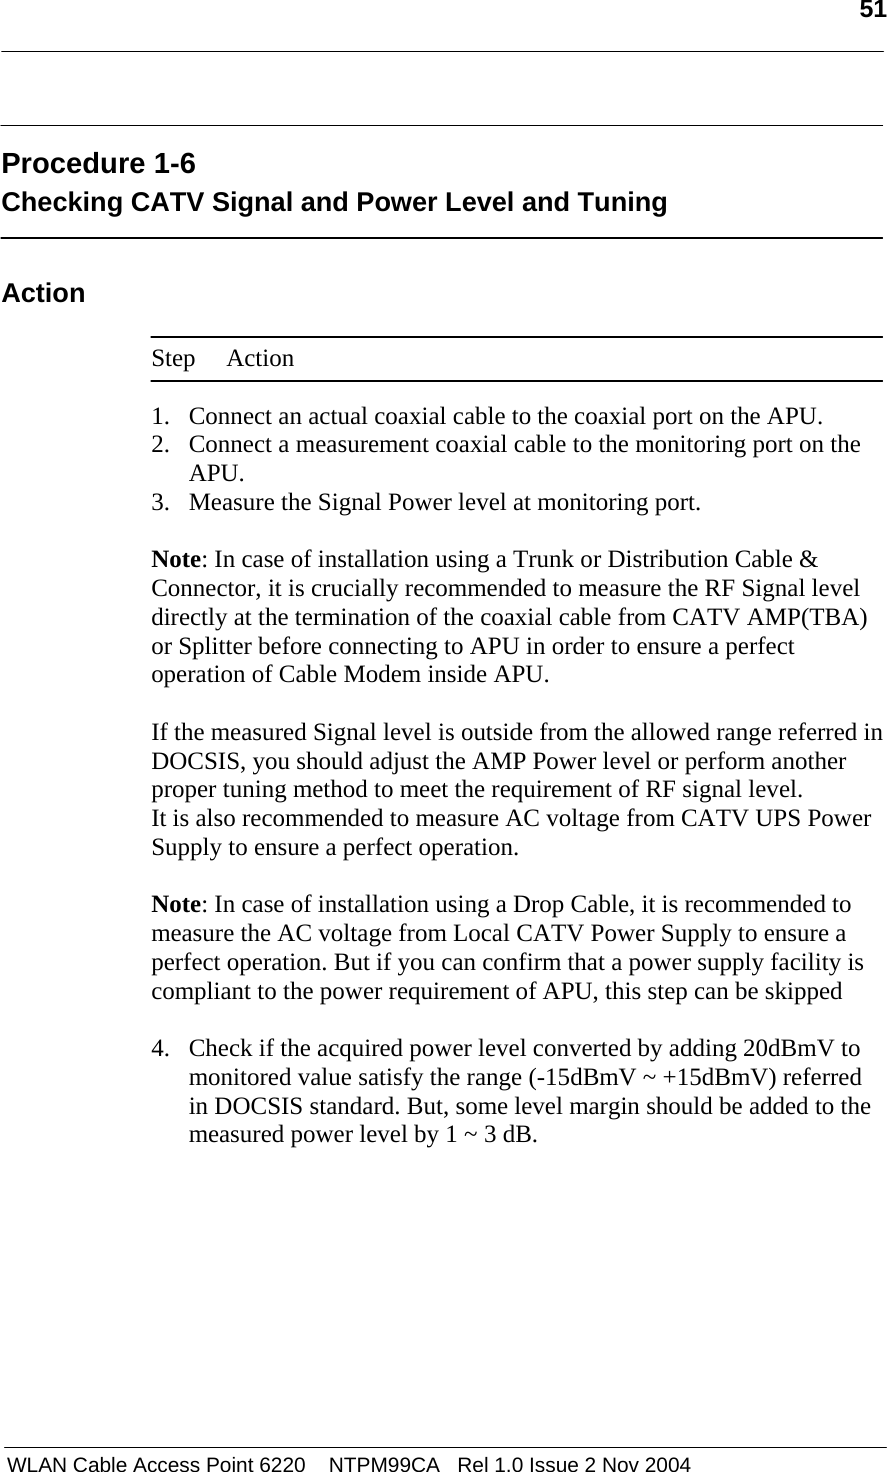   51   WLAN Cable Access Point 6220    NTPM99CA   Rel 1.0 Issue 2 Nov 2004  Procedure 1-6 Checking CATV Signal and Power Level and Tuning  Action  Step Action  1. Connect an actual coaxial cable to the coaxial port on the APU. 2. Connect a measurement coaxial cable to the monitoring port on the APU. 3. Measure the Signal Power level at monitoring port.   Note: In case of installation using a Trunk or Distribution Cable &amp; Connector, it is crucially recommended to measure the RF Signal level directly at the termination of the coaxial cable from CATV AMP(TBA) or Splitter before connecting to APU in order to ensure a perfect operation of Cable Modem inside APU.   If the measured Signal level is outside from the allowed range referred in DOCSIS, you should adjust the AMP Power level or perform another proper tuning method to meet the requirement of RF signal level. It is also recommended to measure AC voltage from CATV UPS Power Supply to ensure a perfect operation.  Note: In case of installation using a Drop Cable, it is recommended to measure the AC voltage from Local CATV Power Supply to ensure a perfect operation. But if you can confirm that a power supply facility is compliant to the power requirement of APU, this step can be skipped  4. Check if the acquired power level converted by adding 20dBmV to monitored value satisfy the range (-15dBmV ~ +15dBmV) referred in DOCSIS standard. But, some level margin should be added to the measured power level by 1 ~ 3 dB.  